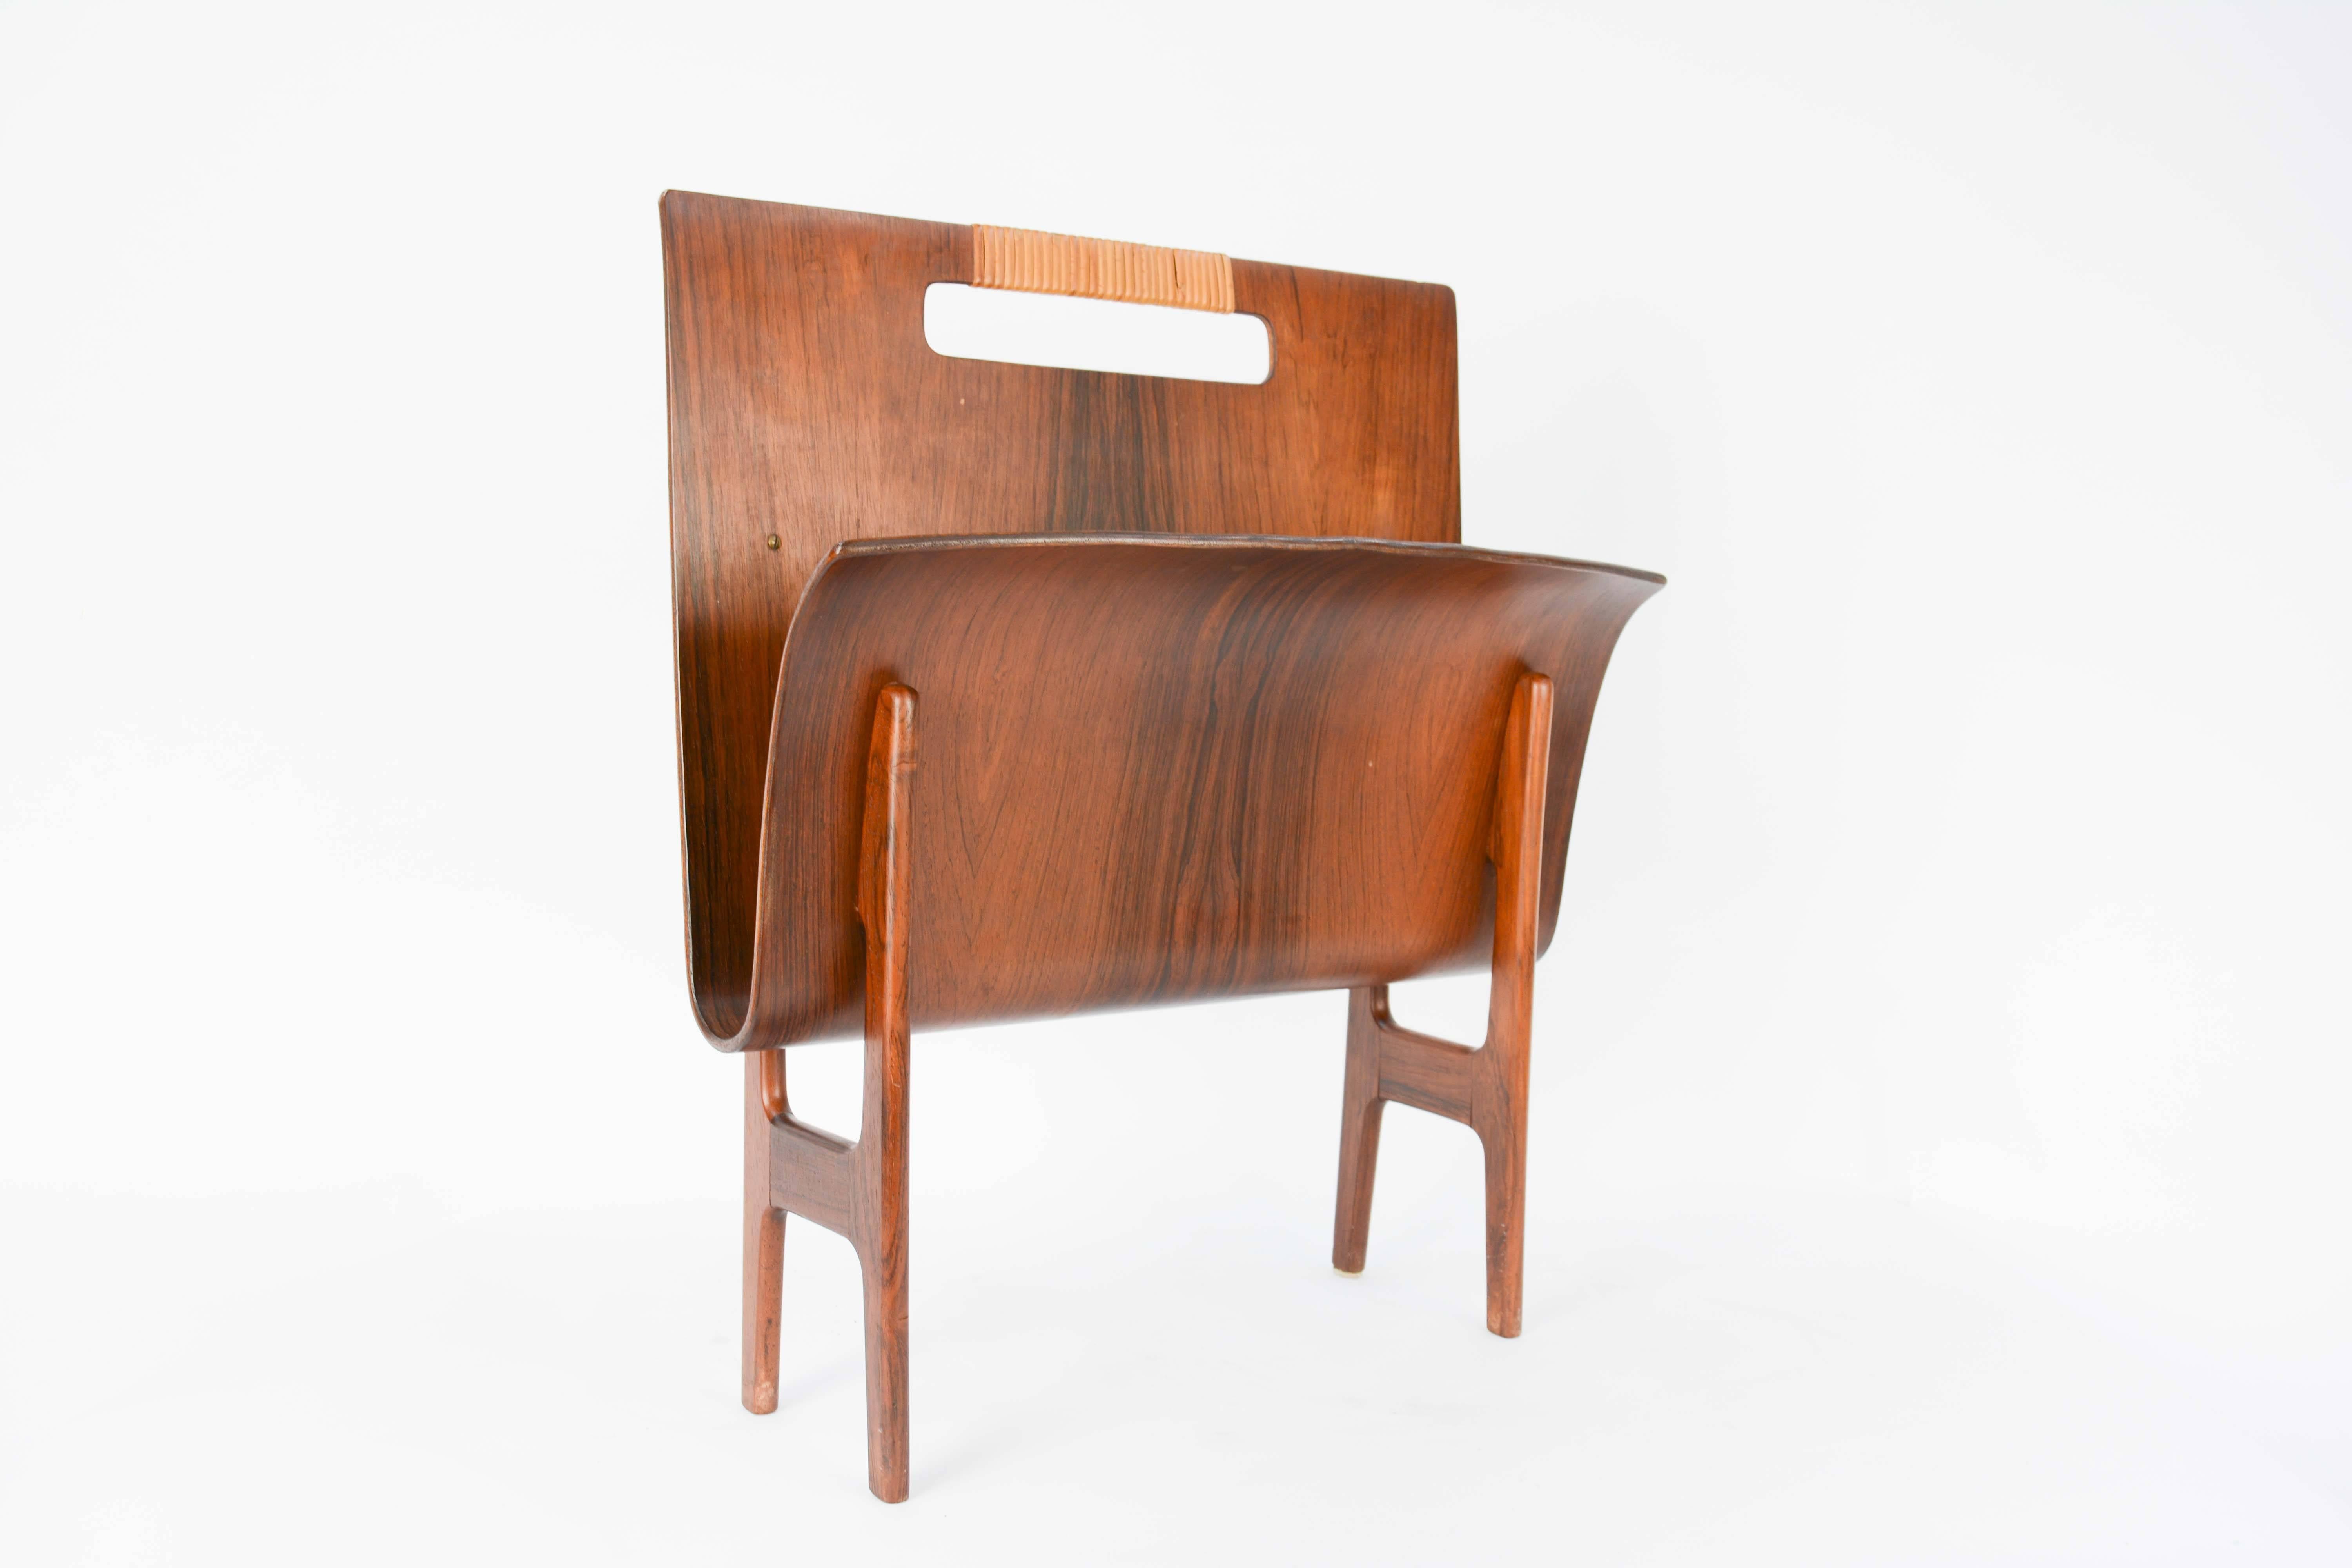 Ejnar Larsen & Axel Bender Madsen magazine stand in rosewood with a caned accented handle grip.